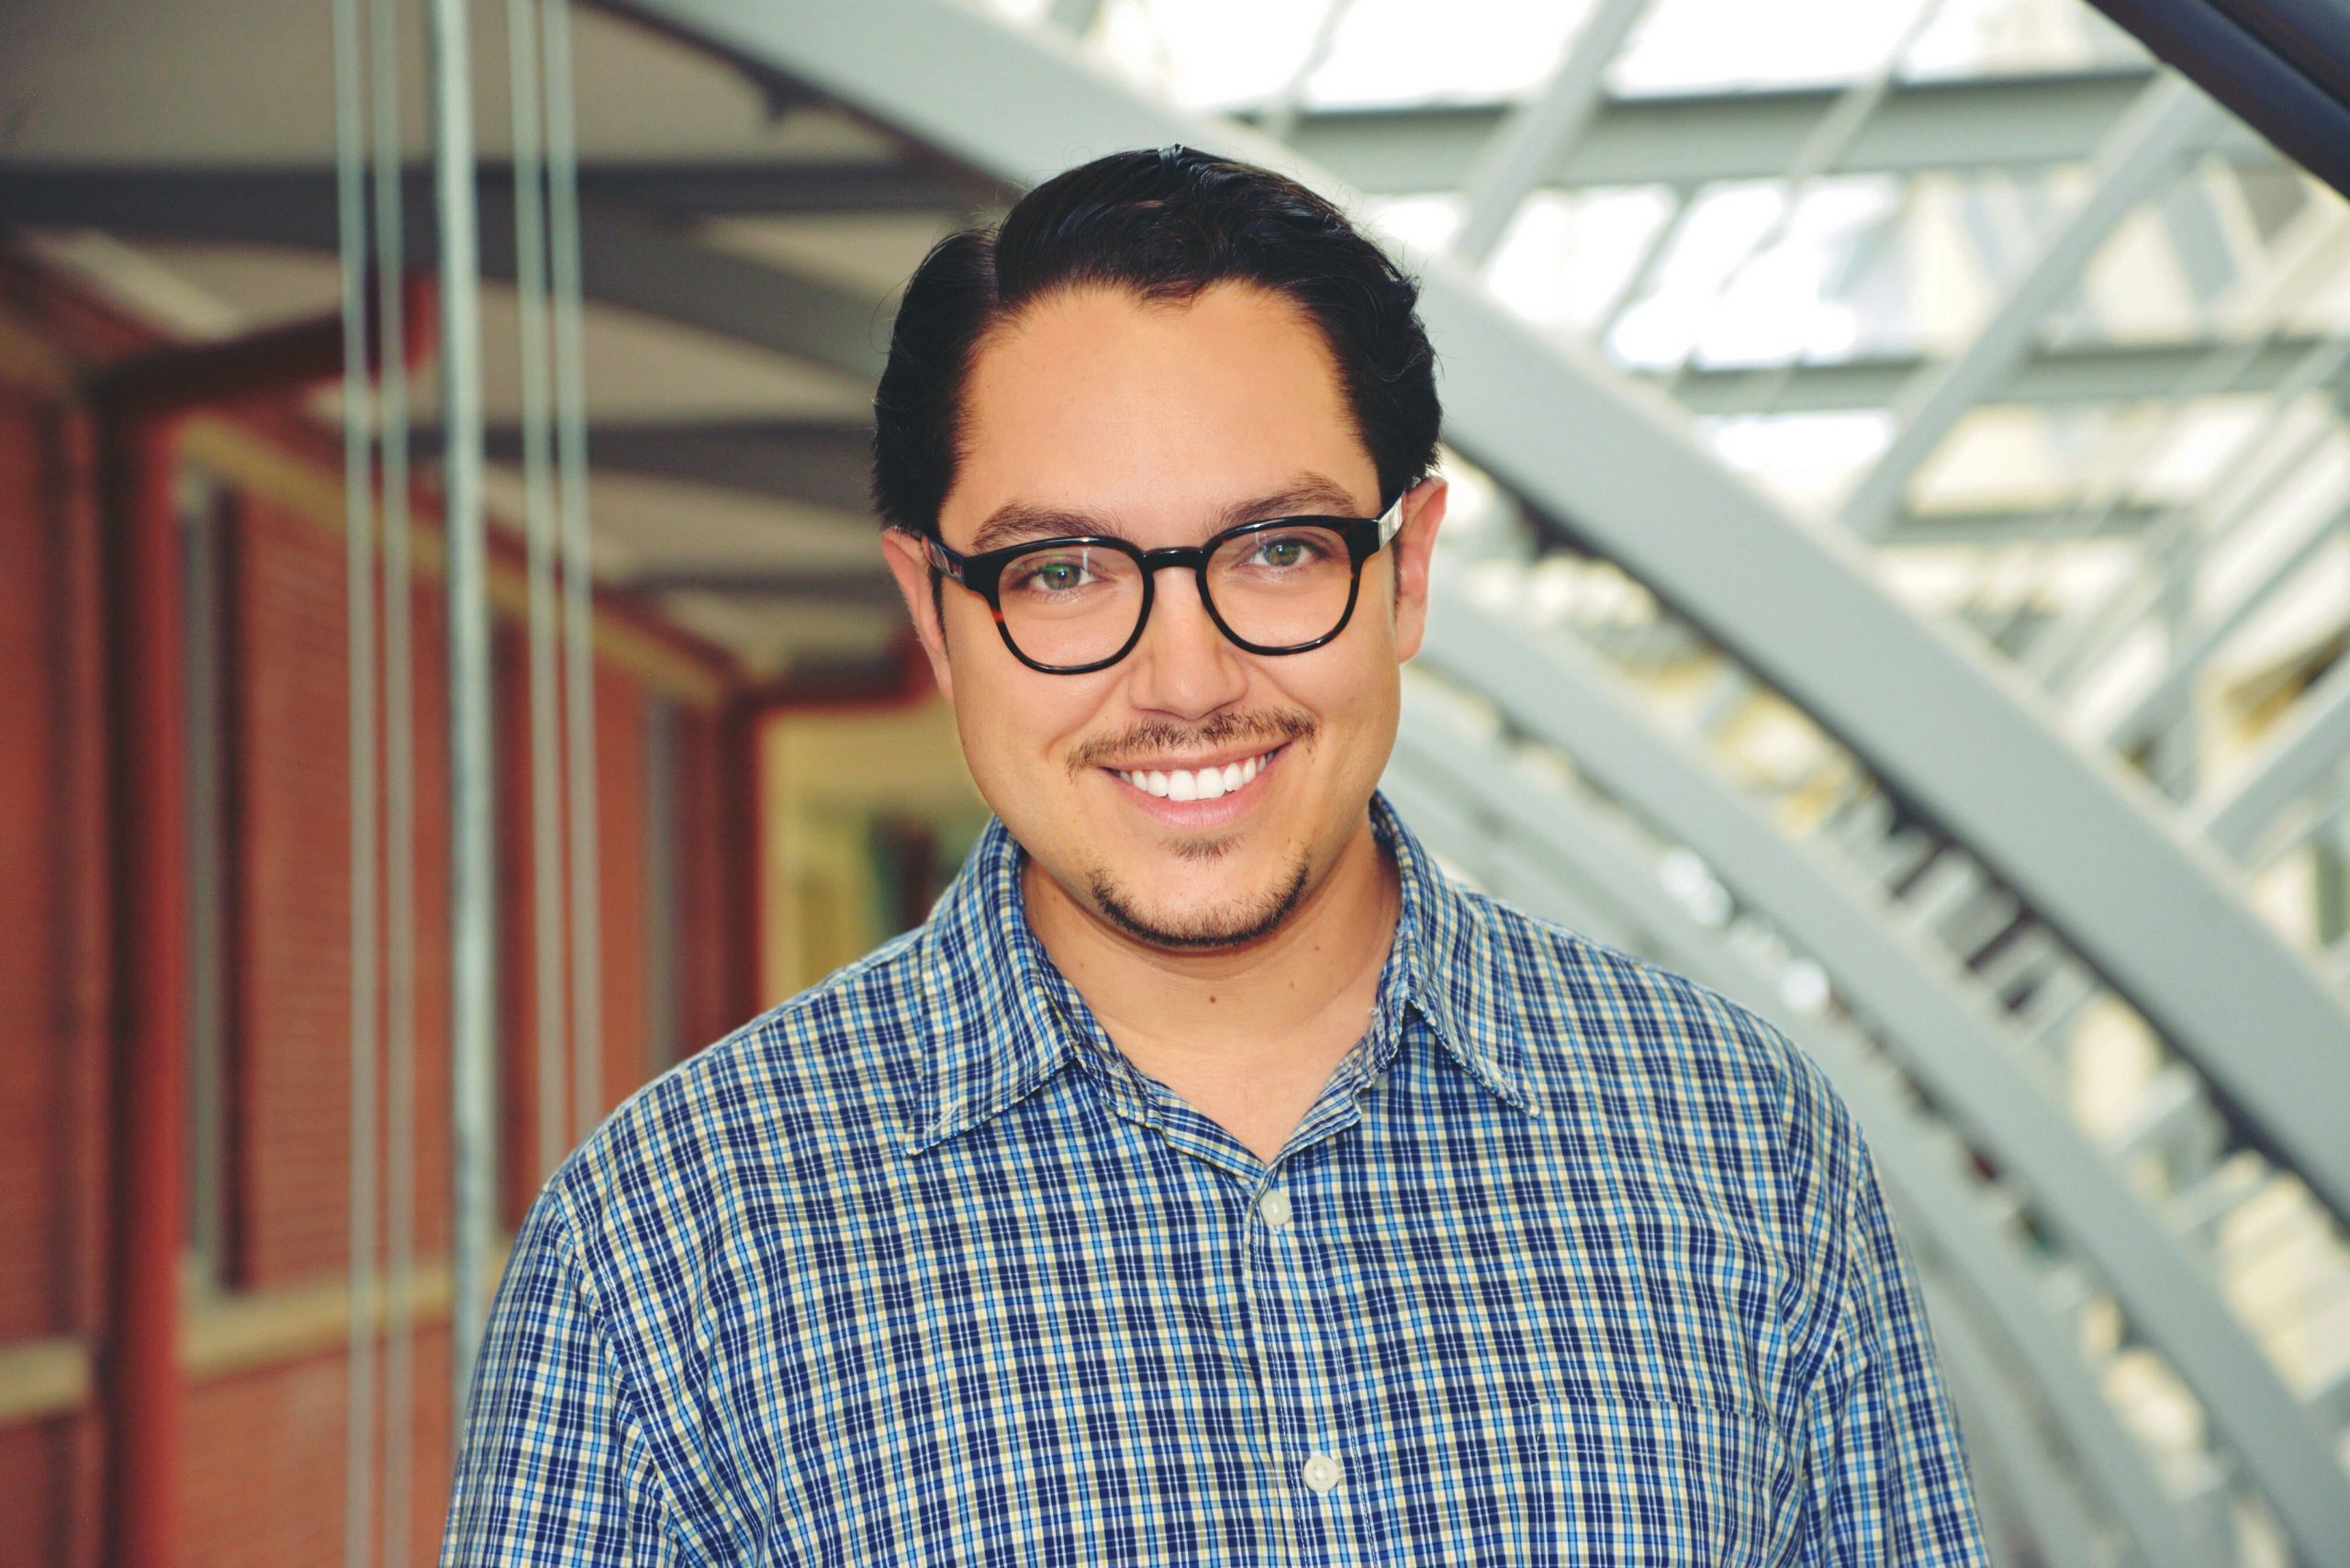 Oscar Ruiz (a Hispanic Latin-American man with short, dark brown hair and glasses, wearing a blue and white checked shirt), smiling into the camera.